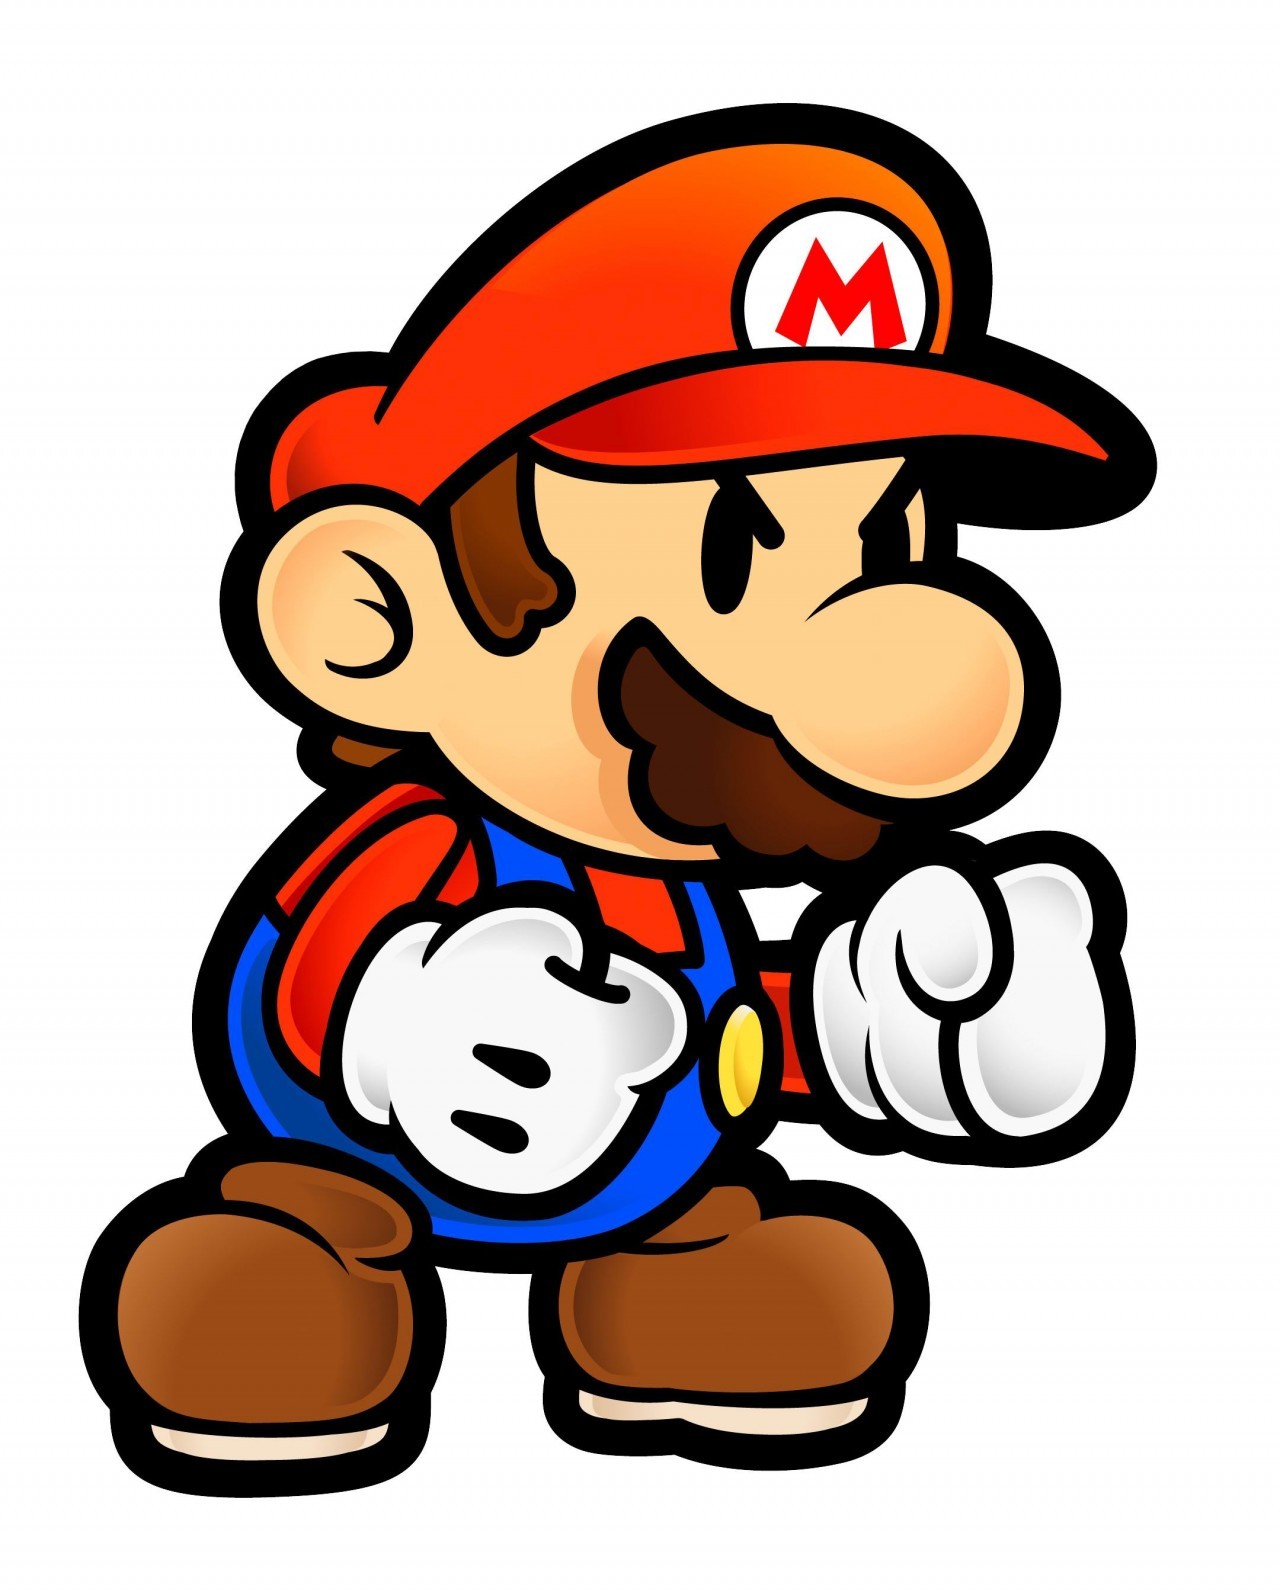 ranking-the-paper-mario-games-ign-boards